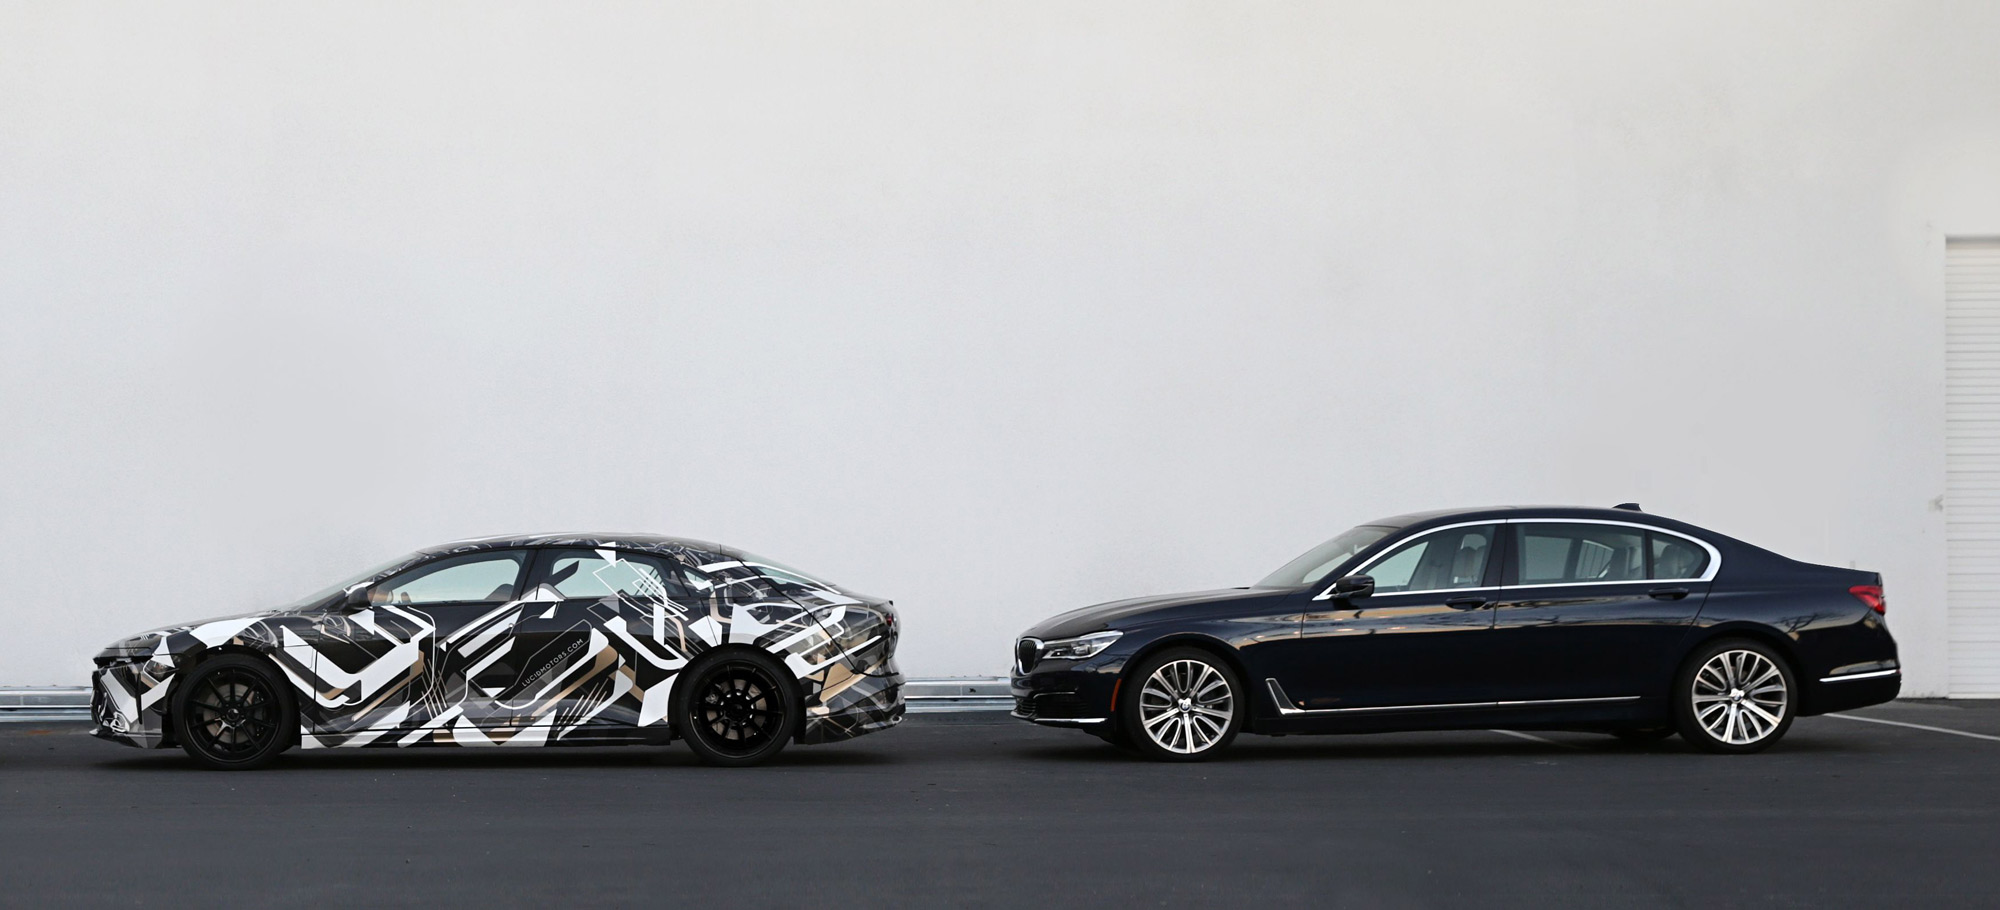 Lucid Motors and BMW